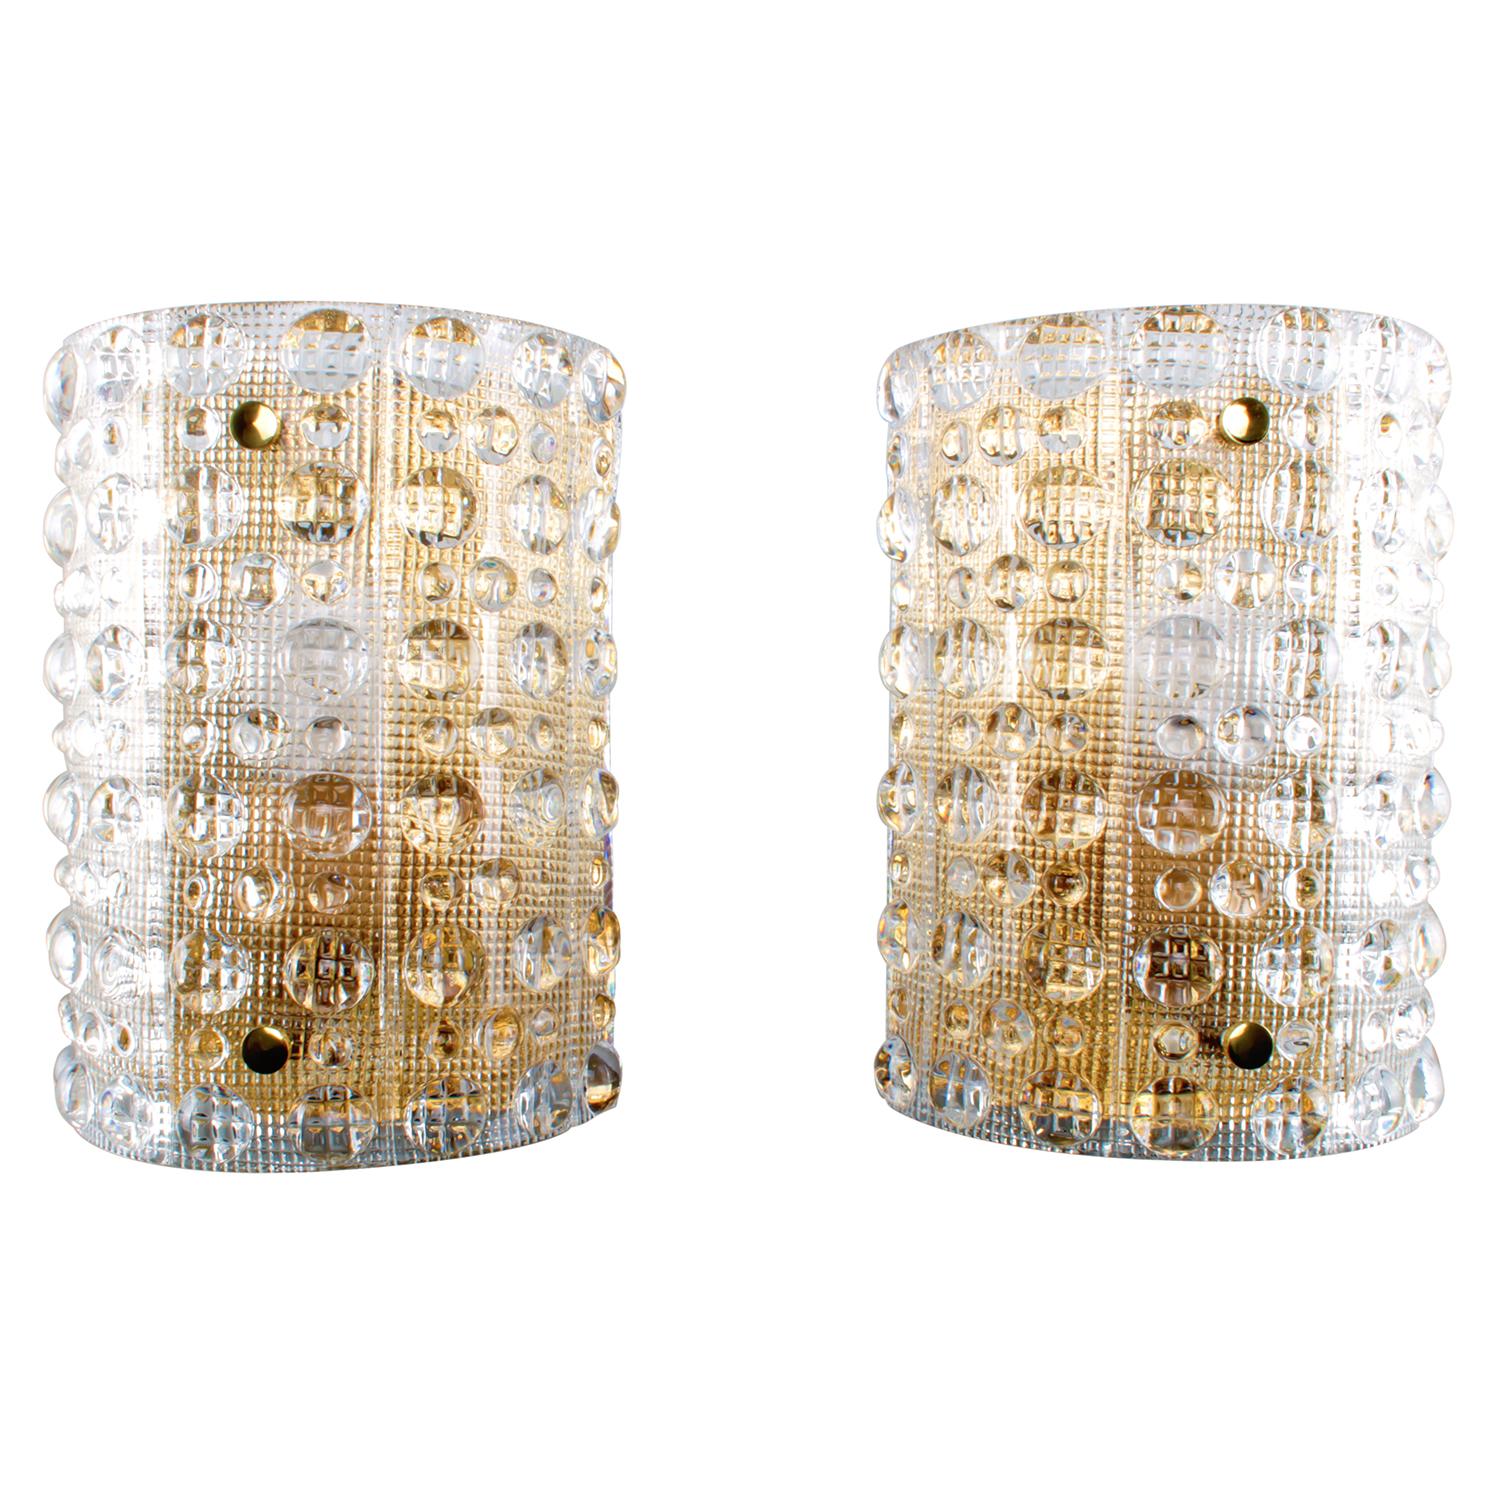 Scandinavian Modern Crystal Sconces 'Pair' Wall Lamps by Carl Fagerlund for Orrefors in the 1960s